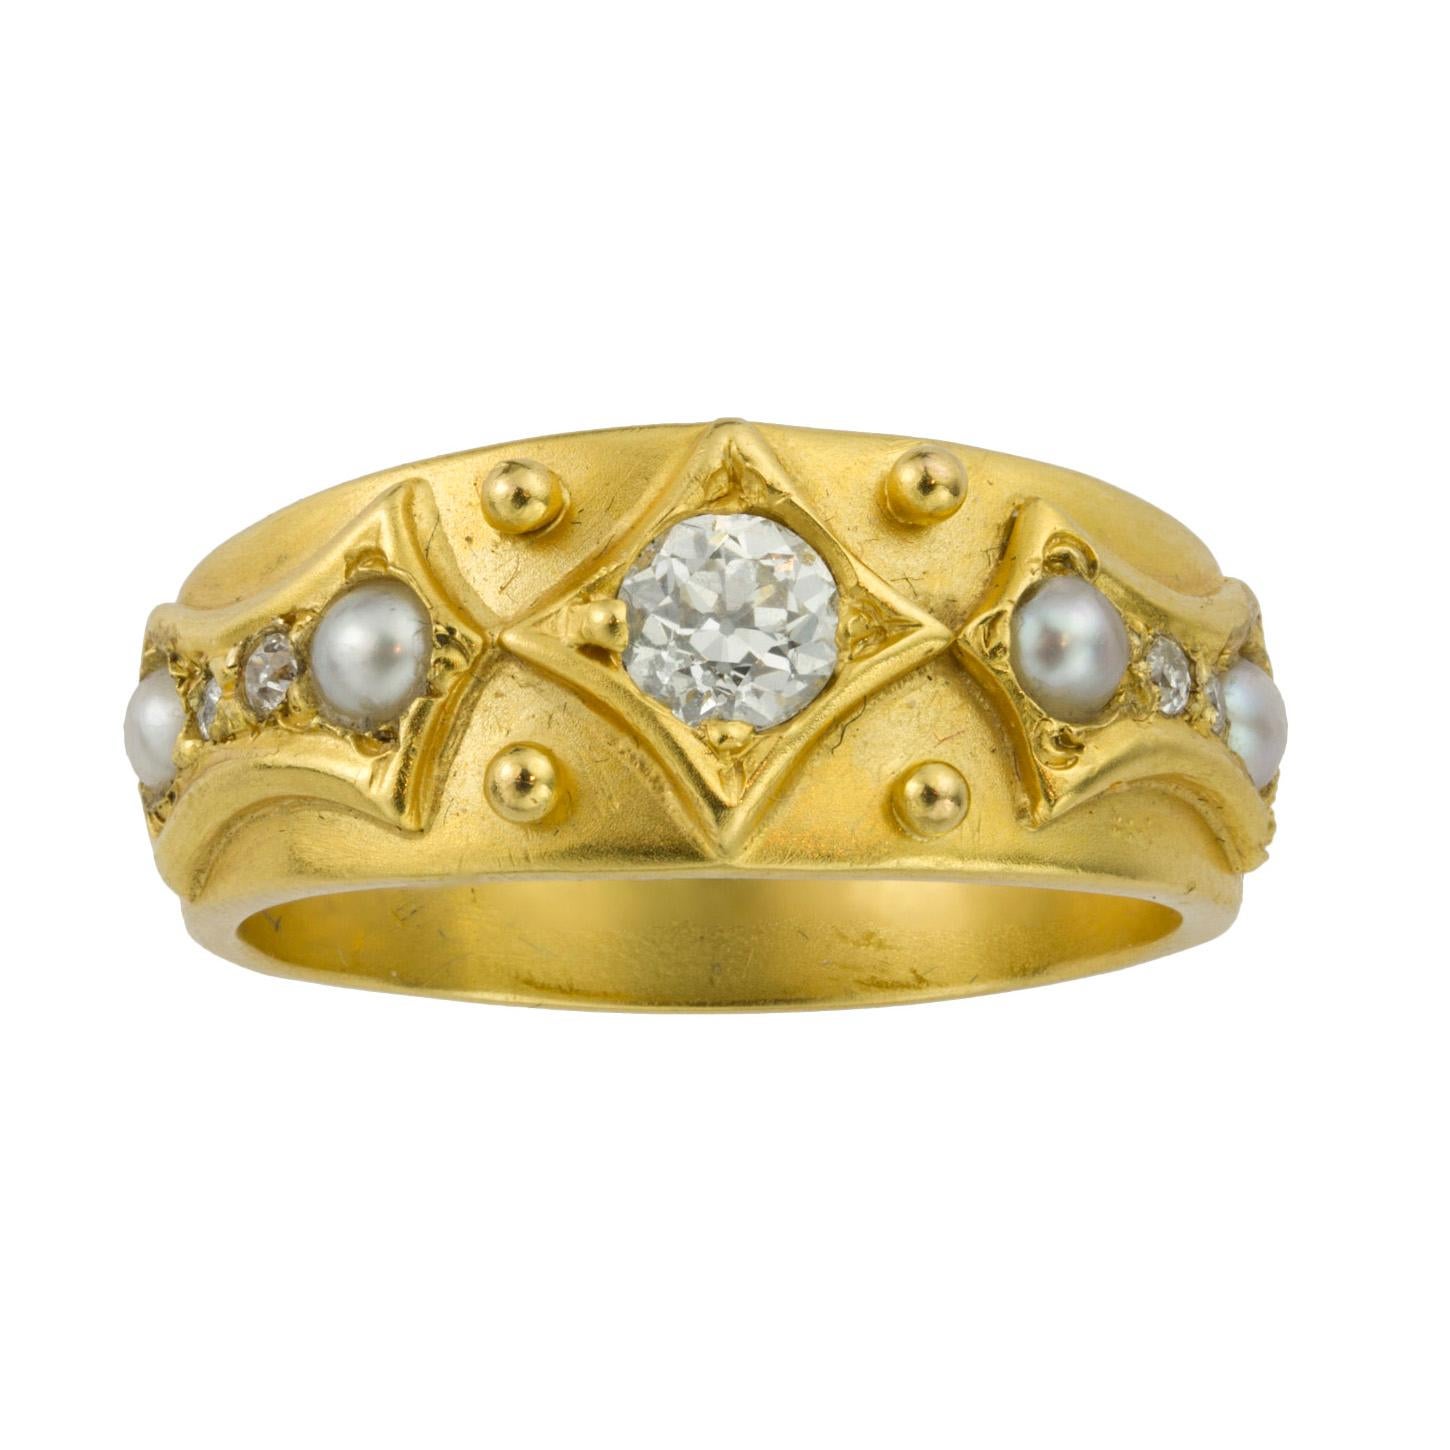 High Victorian Victorian Diamond and Pearl Yellow Gold Ring